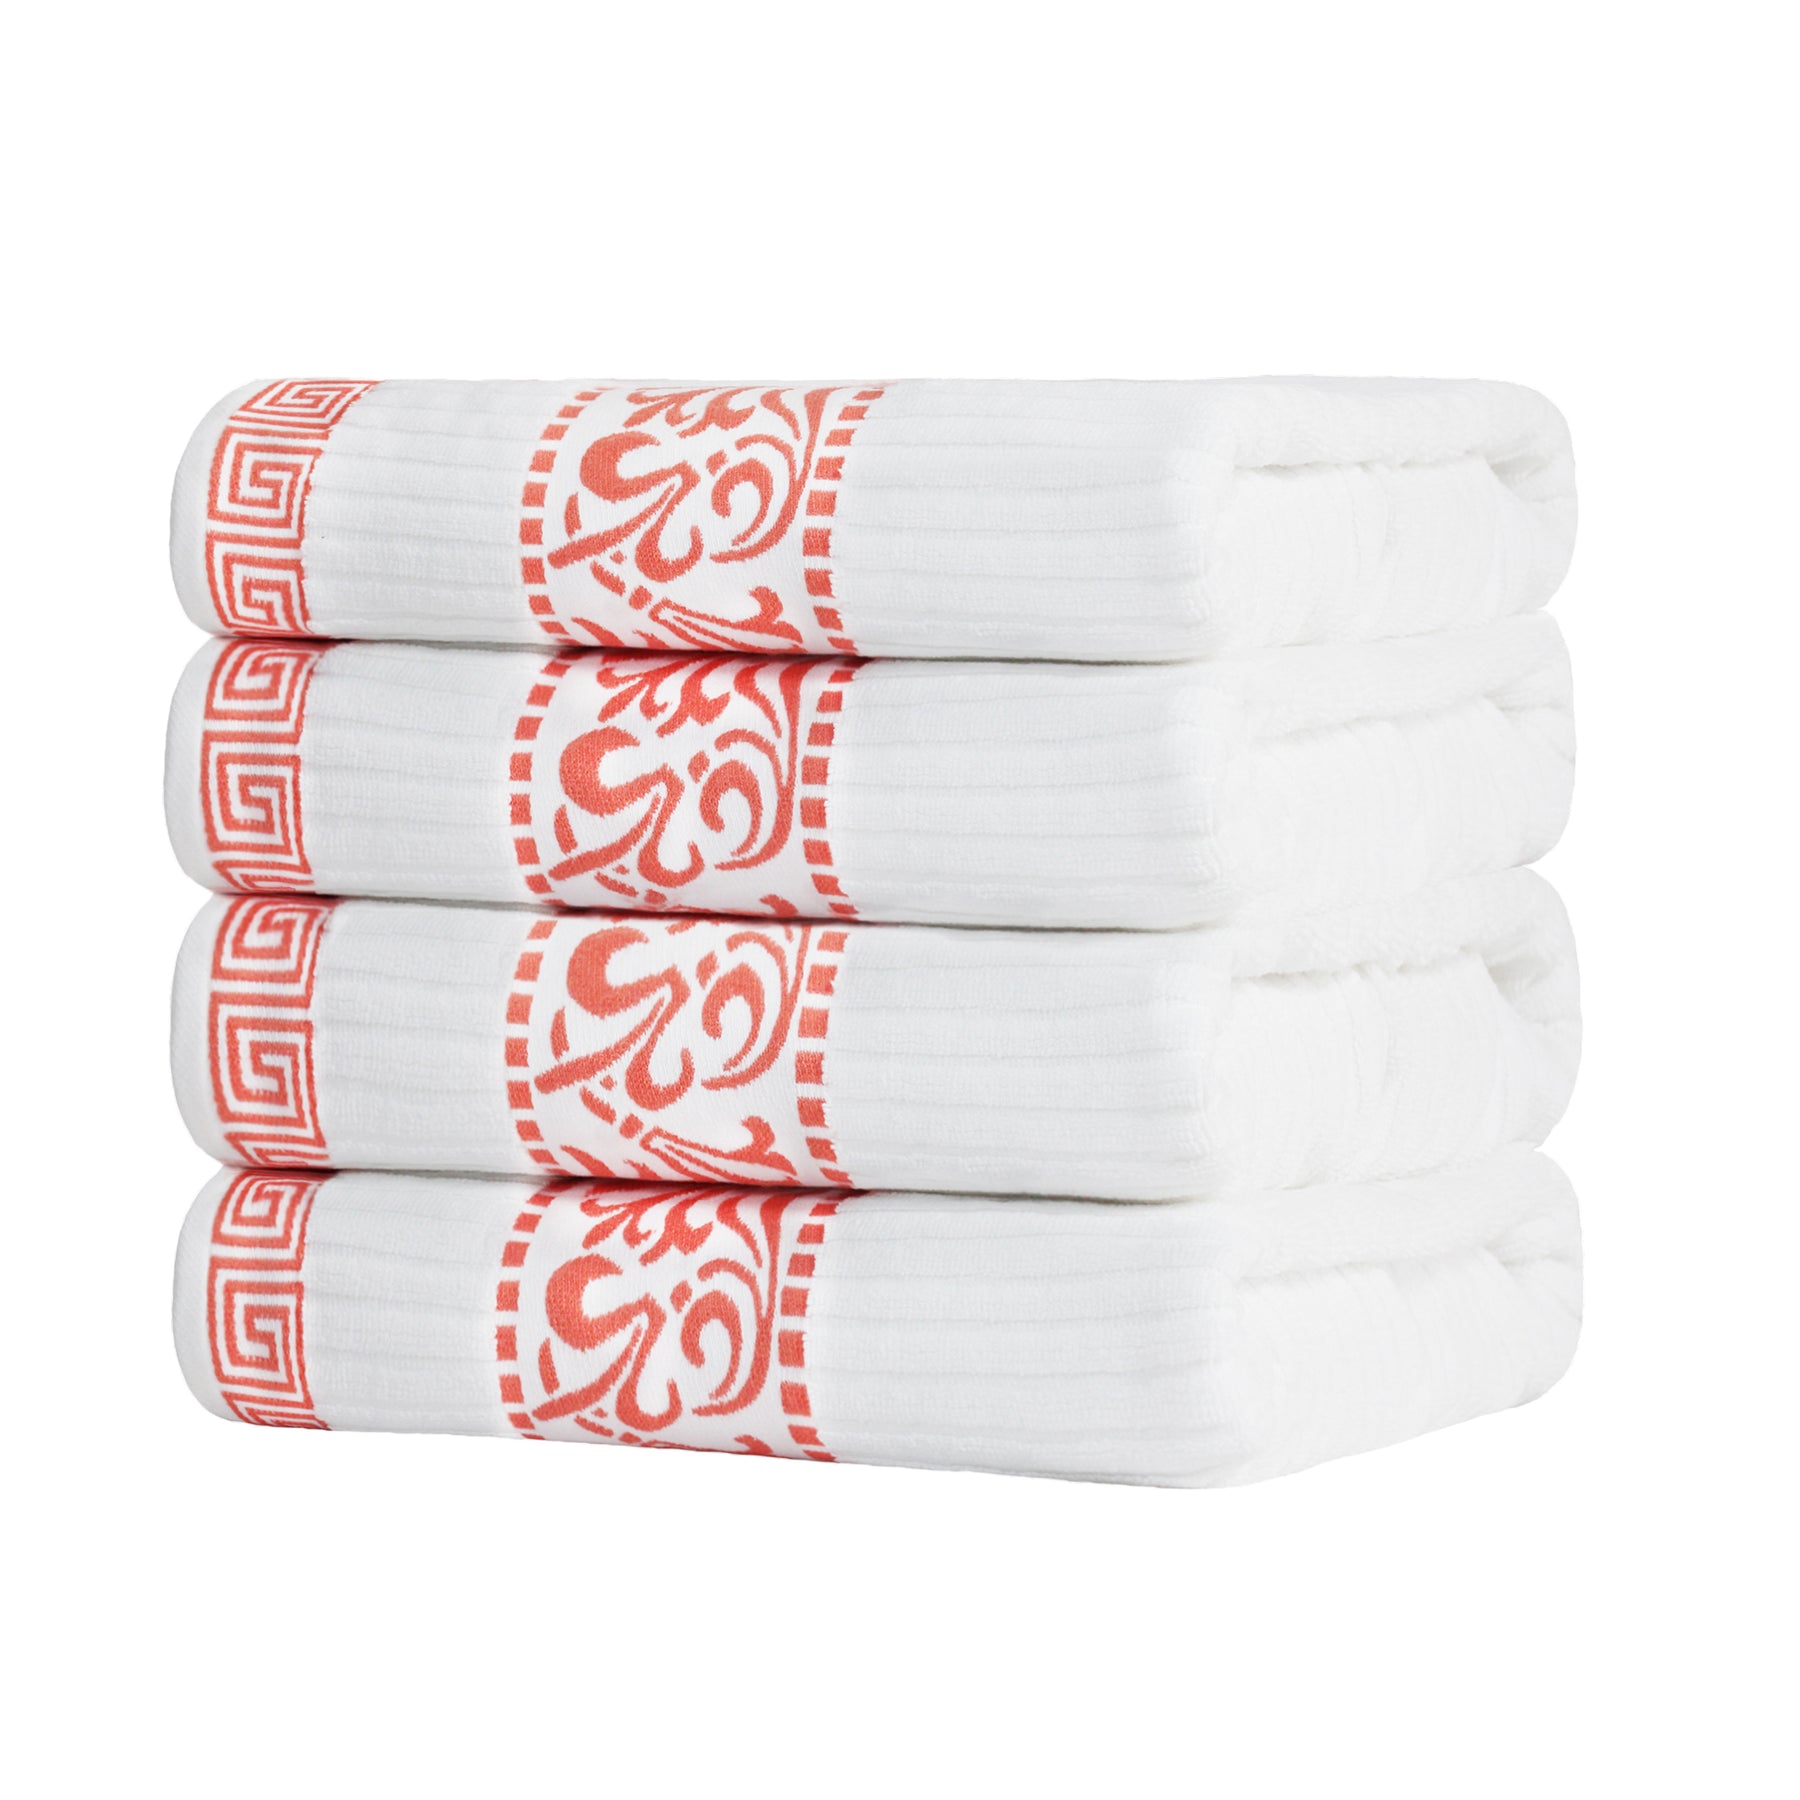 Superior Athens Cotton 4-Piece Bath Towel Set with Greek Scroll and Floral Pattern - Coral